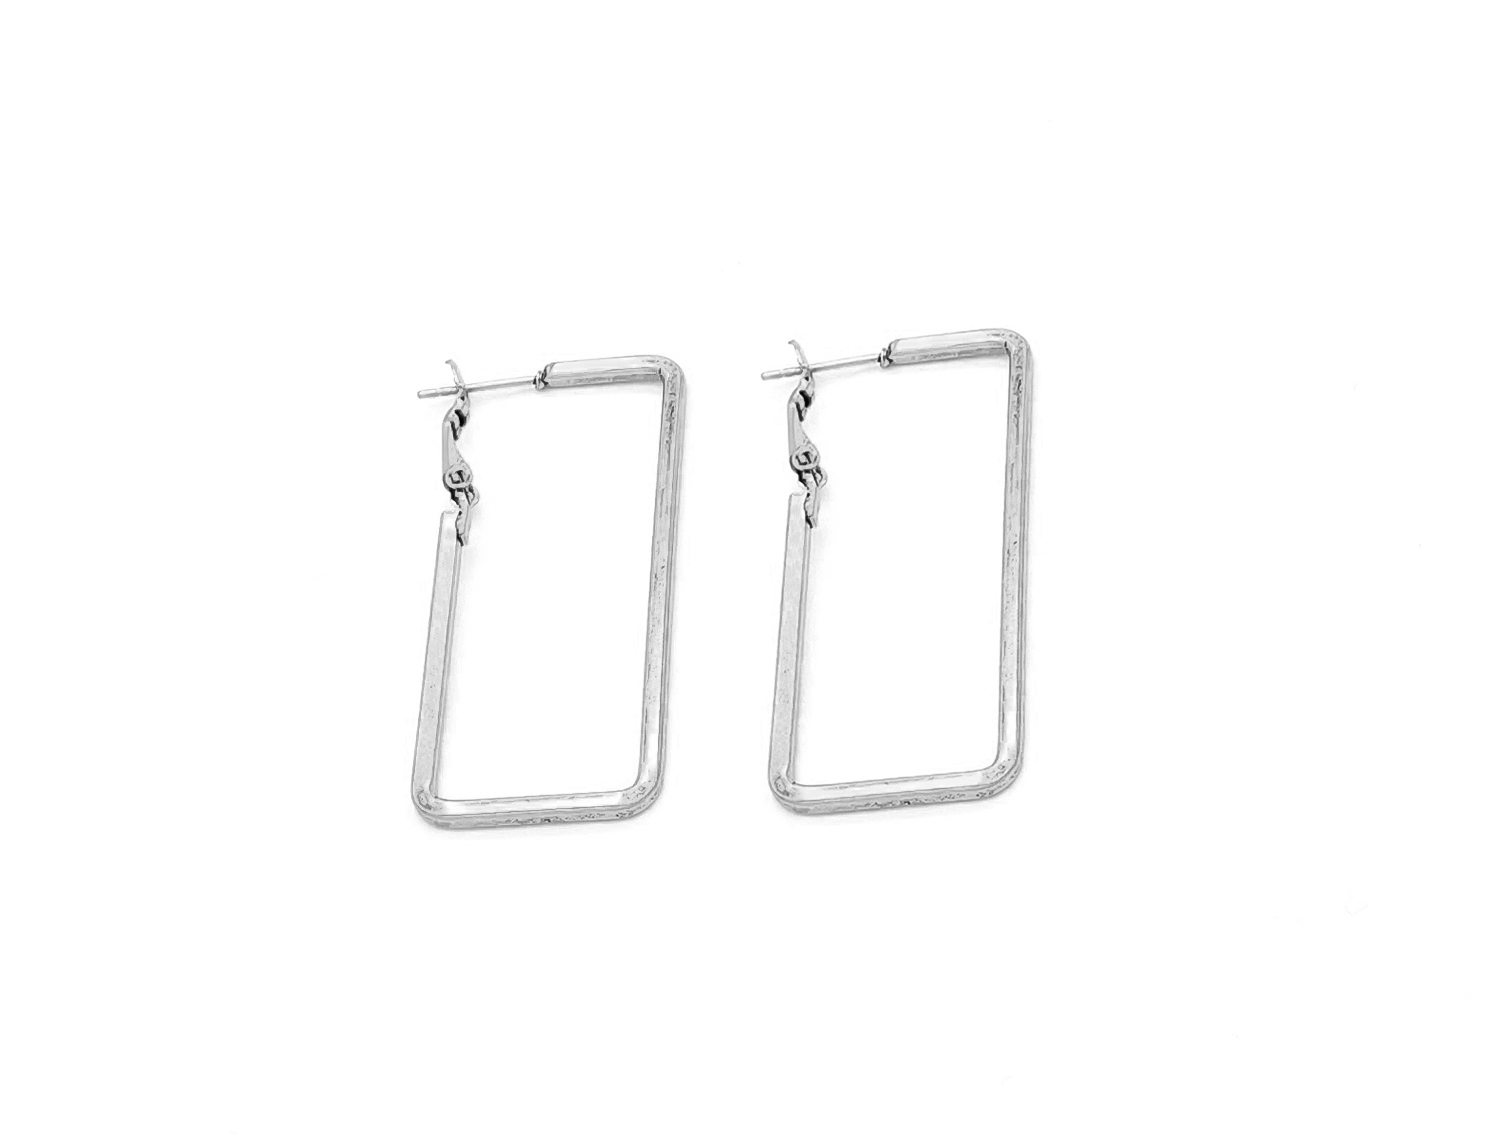 Square Earrings Silver Plated - Adema